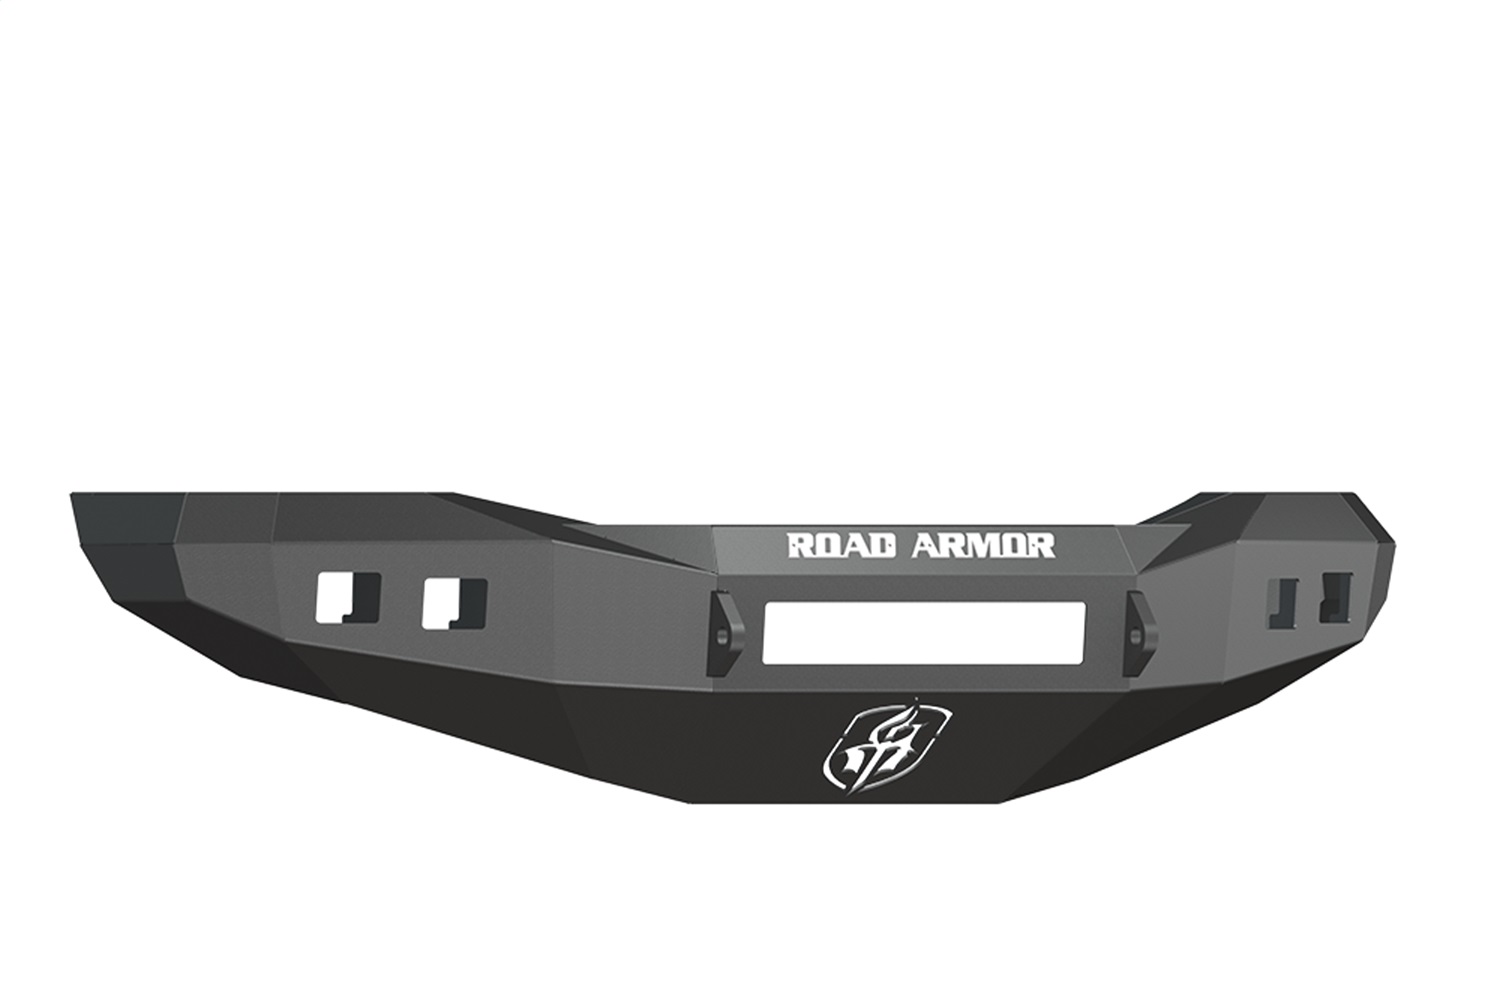 Road Armor Road Armor 406R0B-NW Front Stealth Bumper Fits 06-09 Ram 2500 Ram 3500